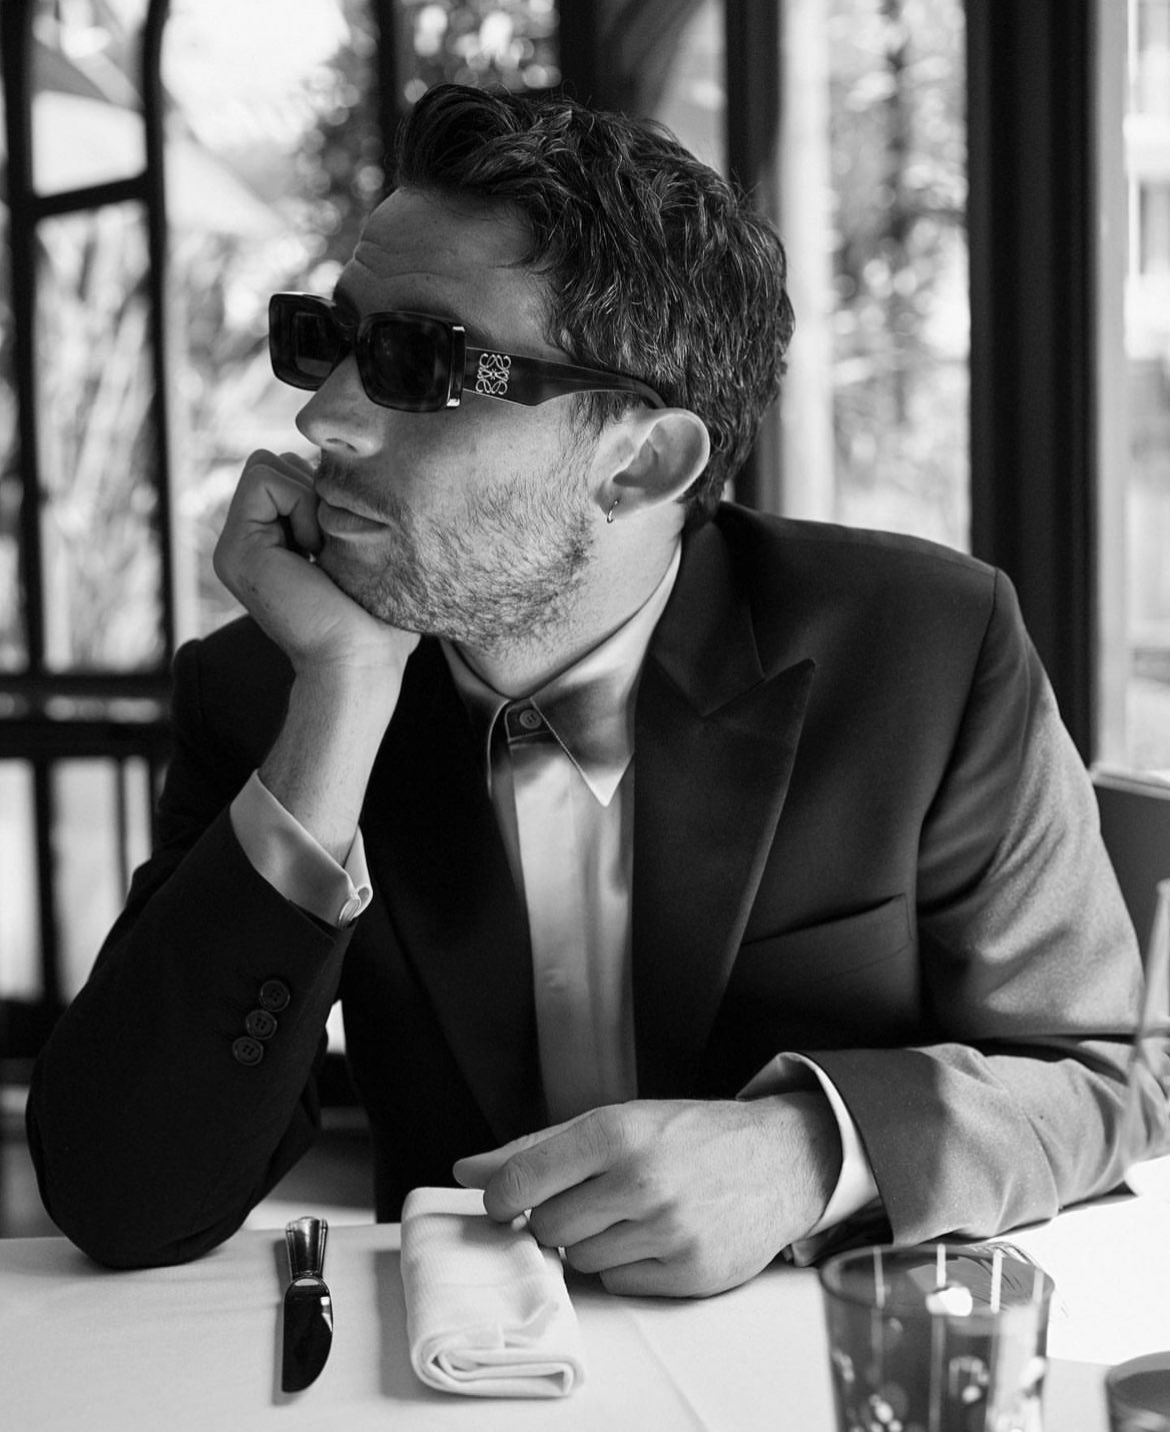 A man in a suit and sunglasses sits at a table. - Josh O'Connor